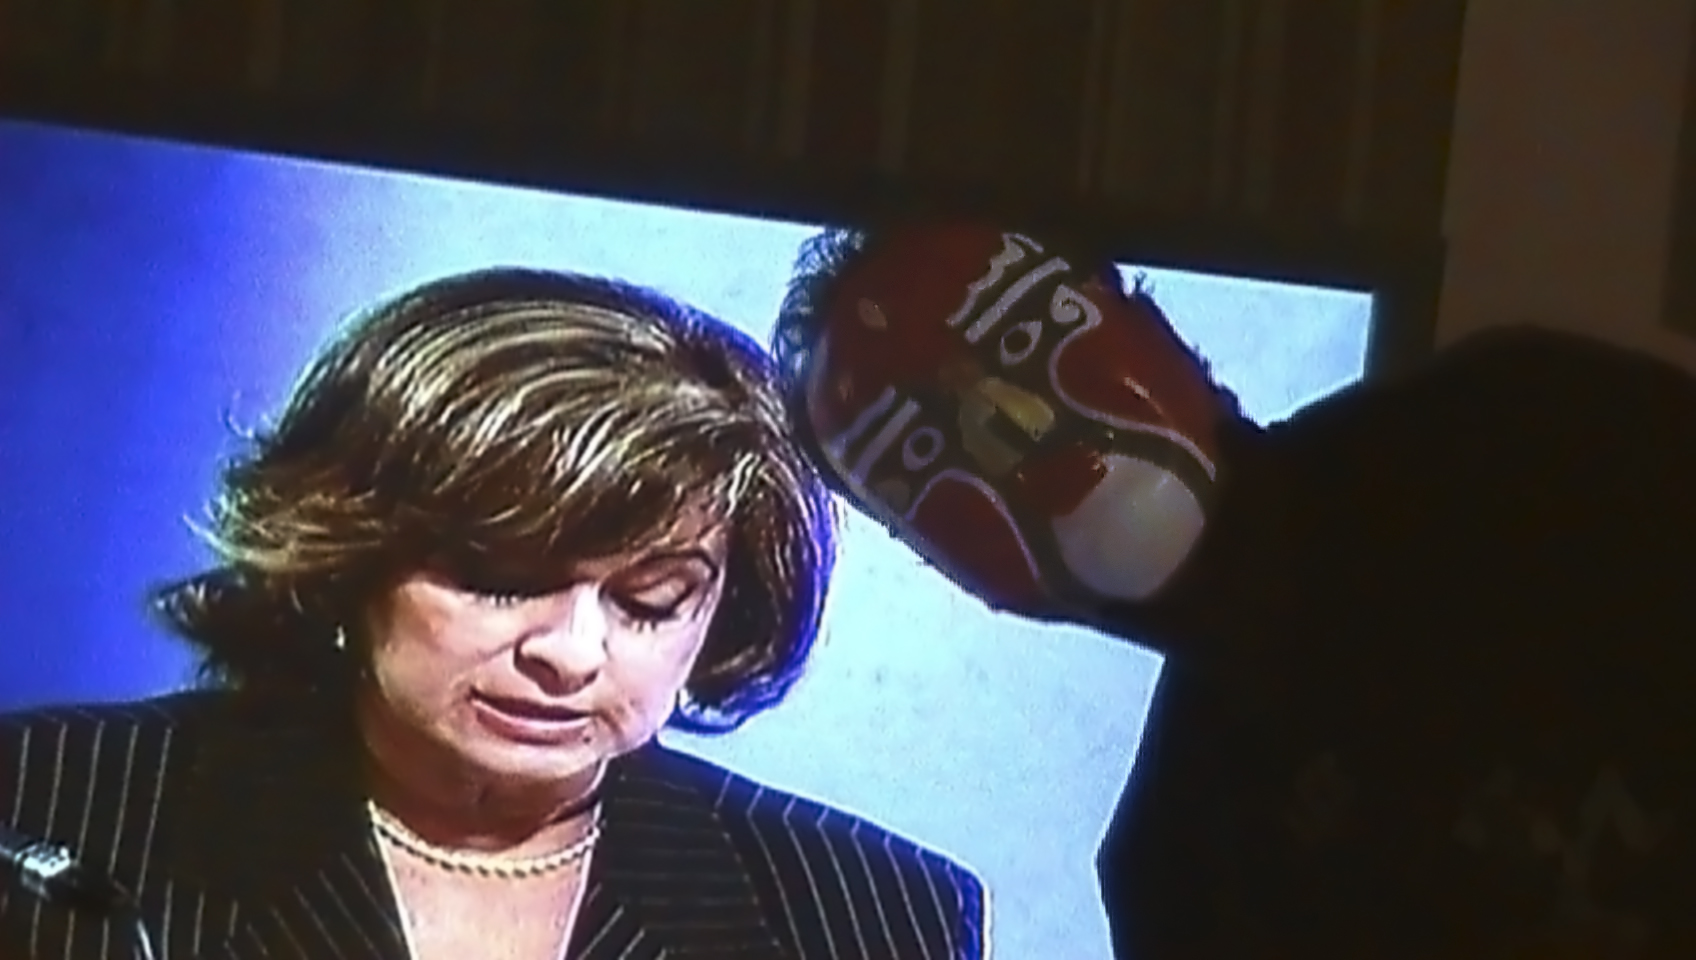 Alfredo with mask in front of politician on TV